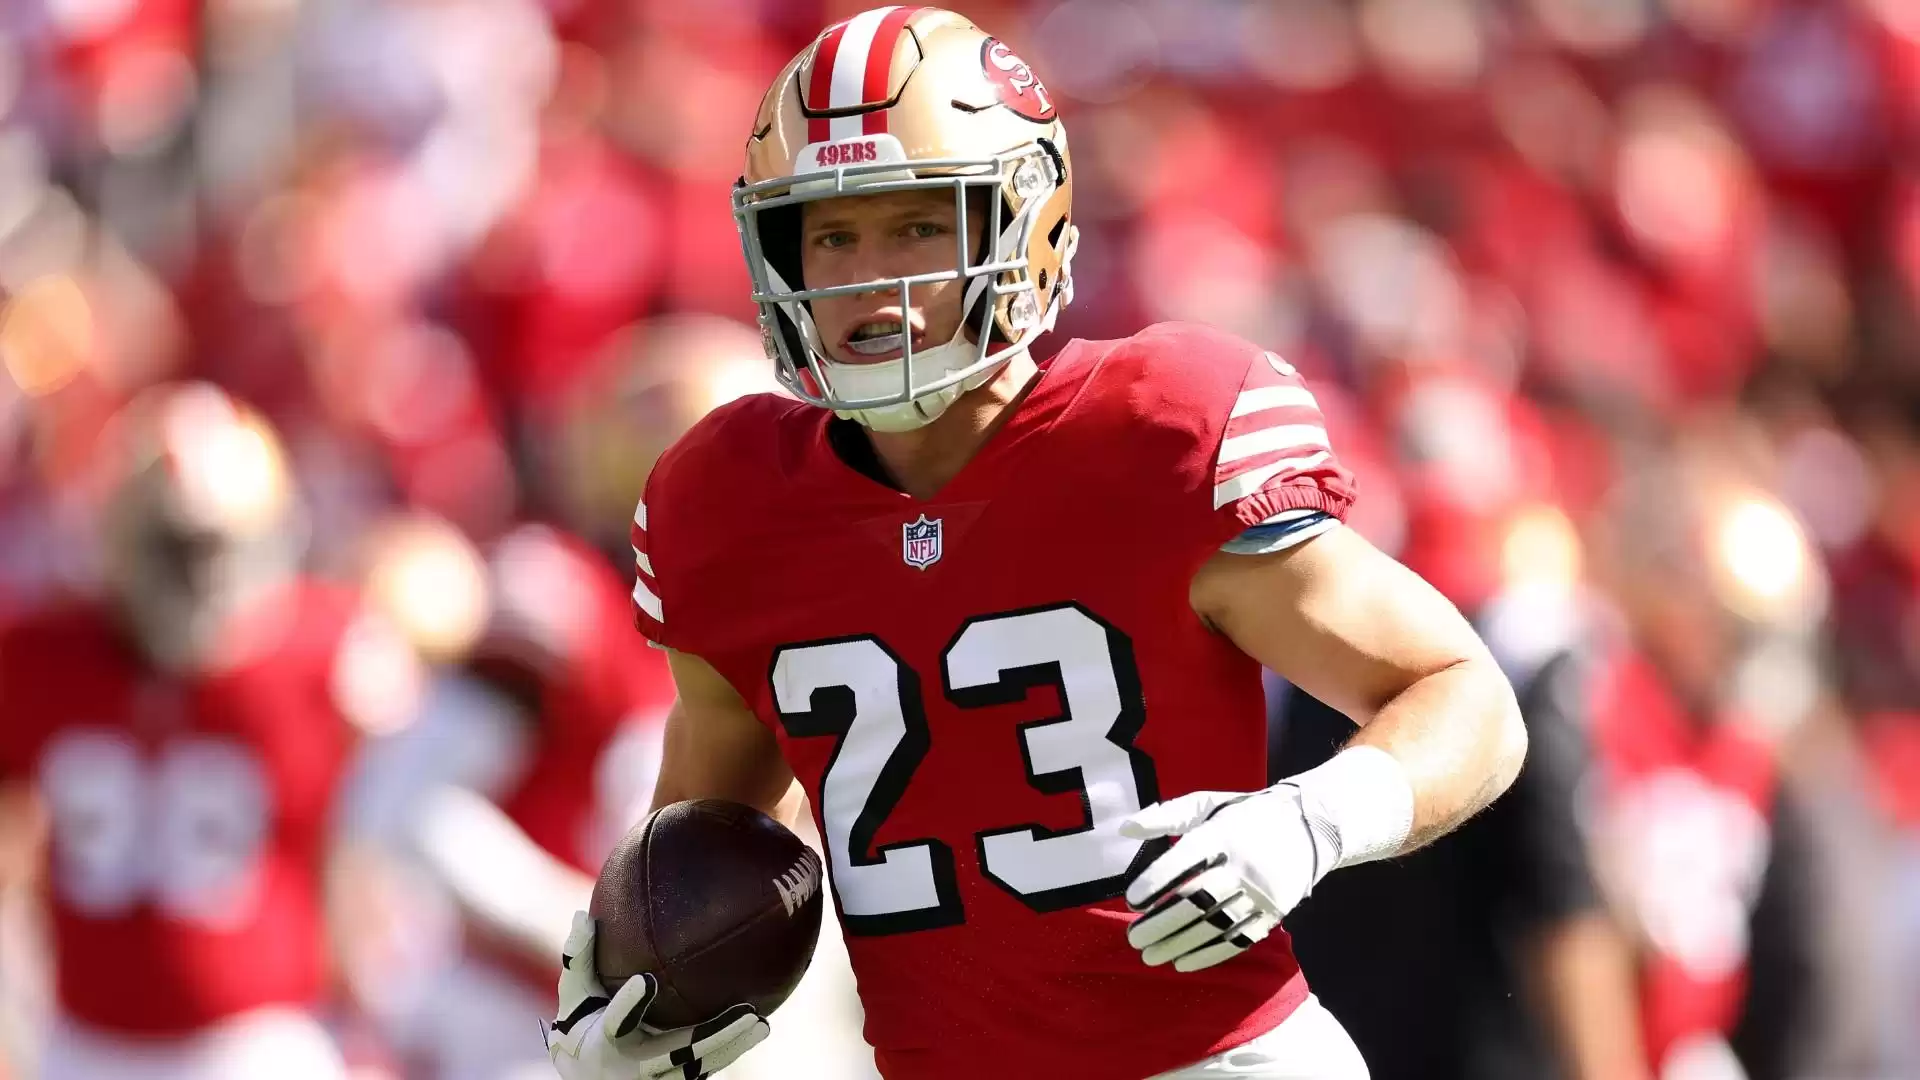 Christian McCaffrey injury update: 49ers RB out of Browns game with oblique injury